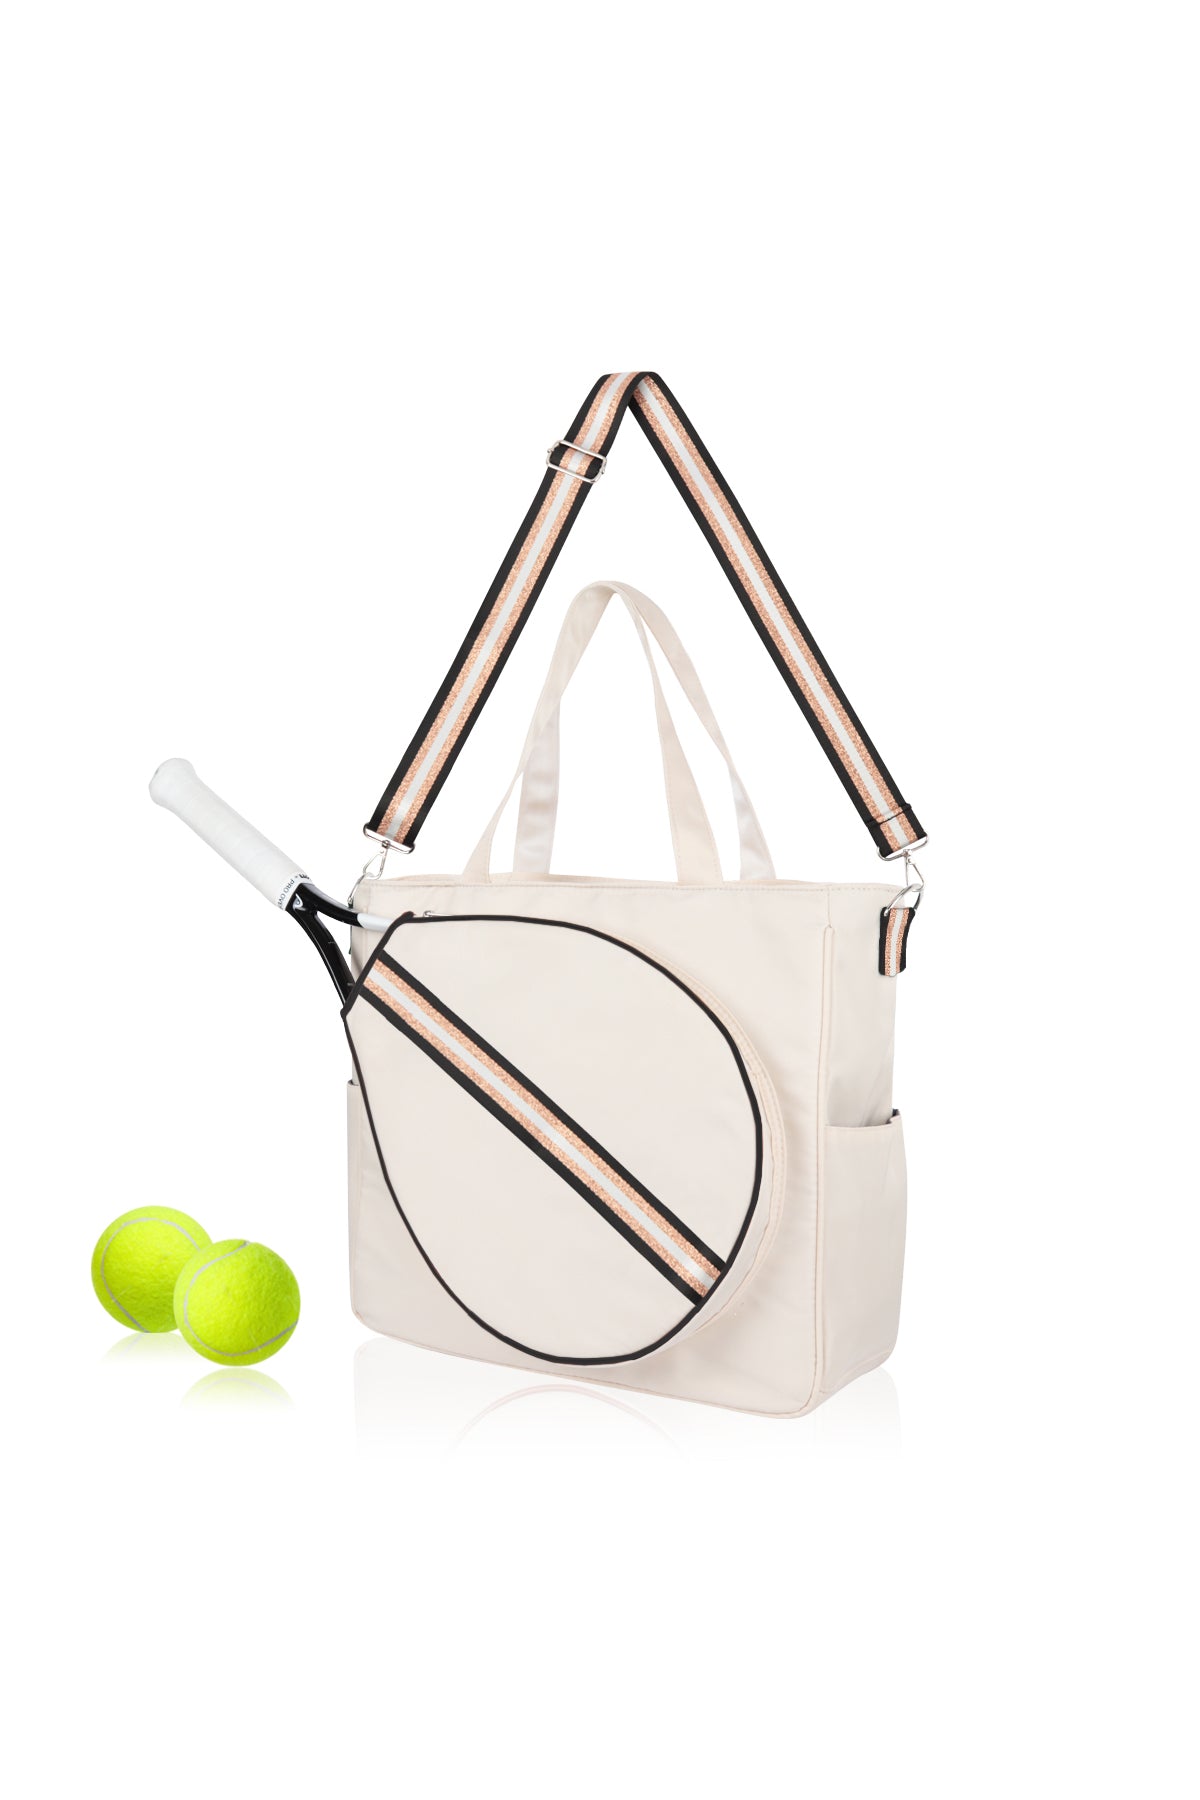 The Sport Carryall in Black - Chic Tennis Tote